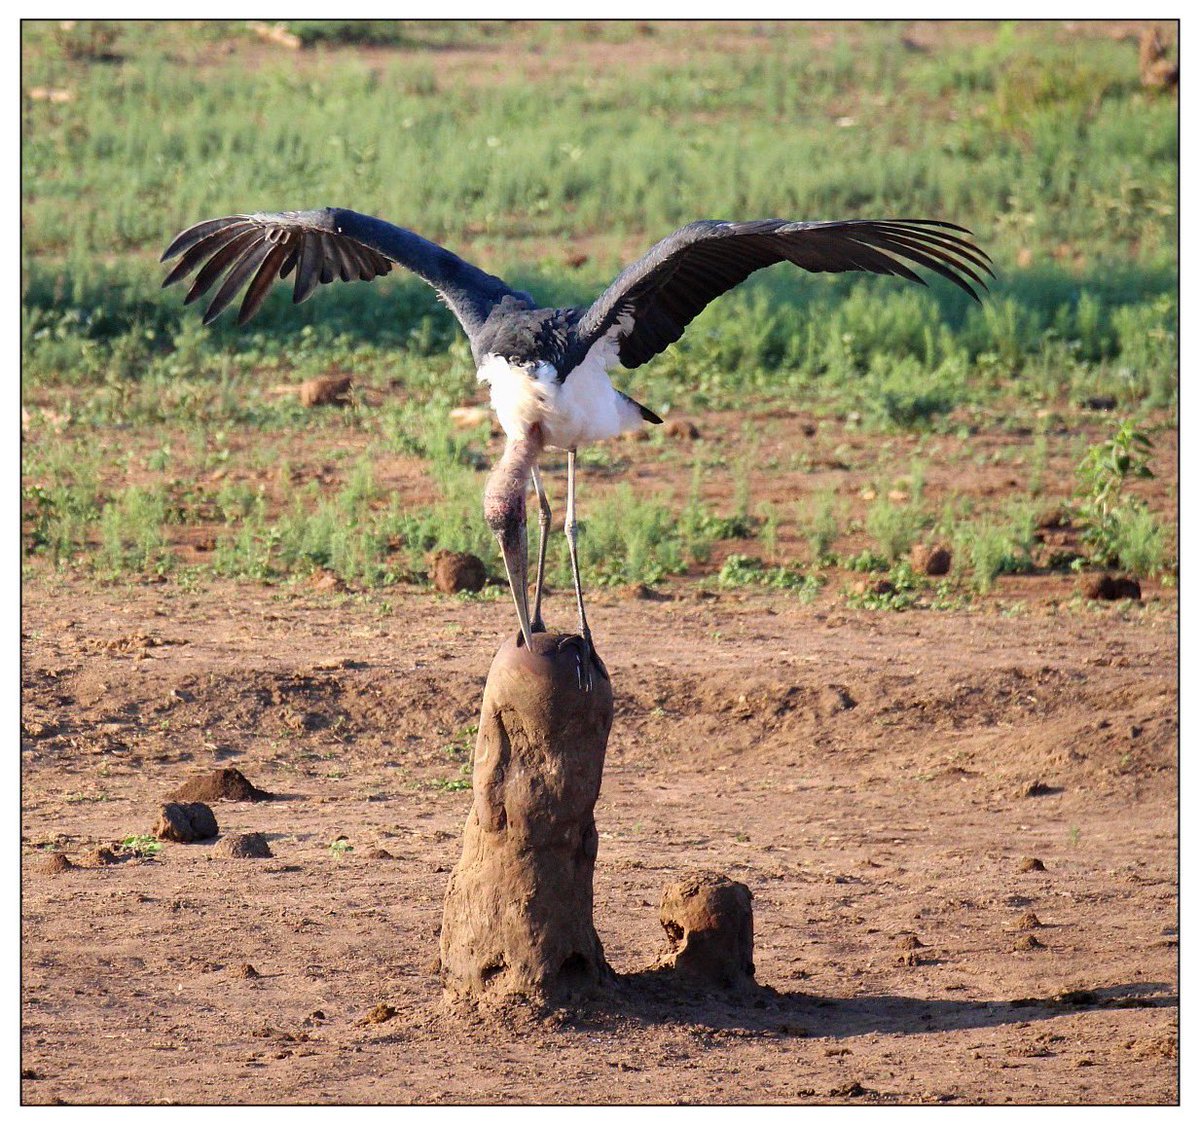 ..
🪽🪽

“Spread your wings. It’s time to fly!” 

A Marabou Stork about to take off….

📸 My own.
🇿🇦 #MadikweGameReserve